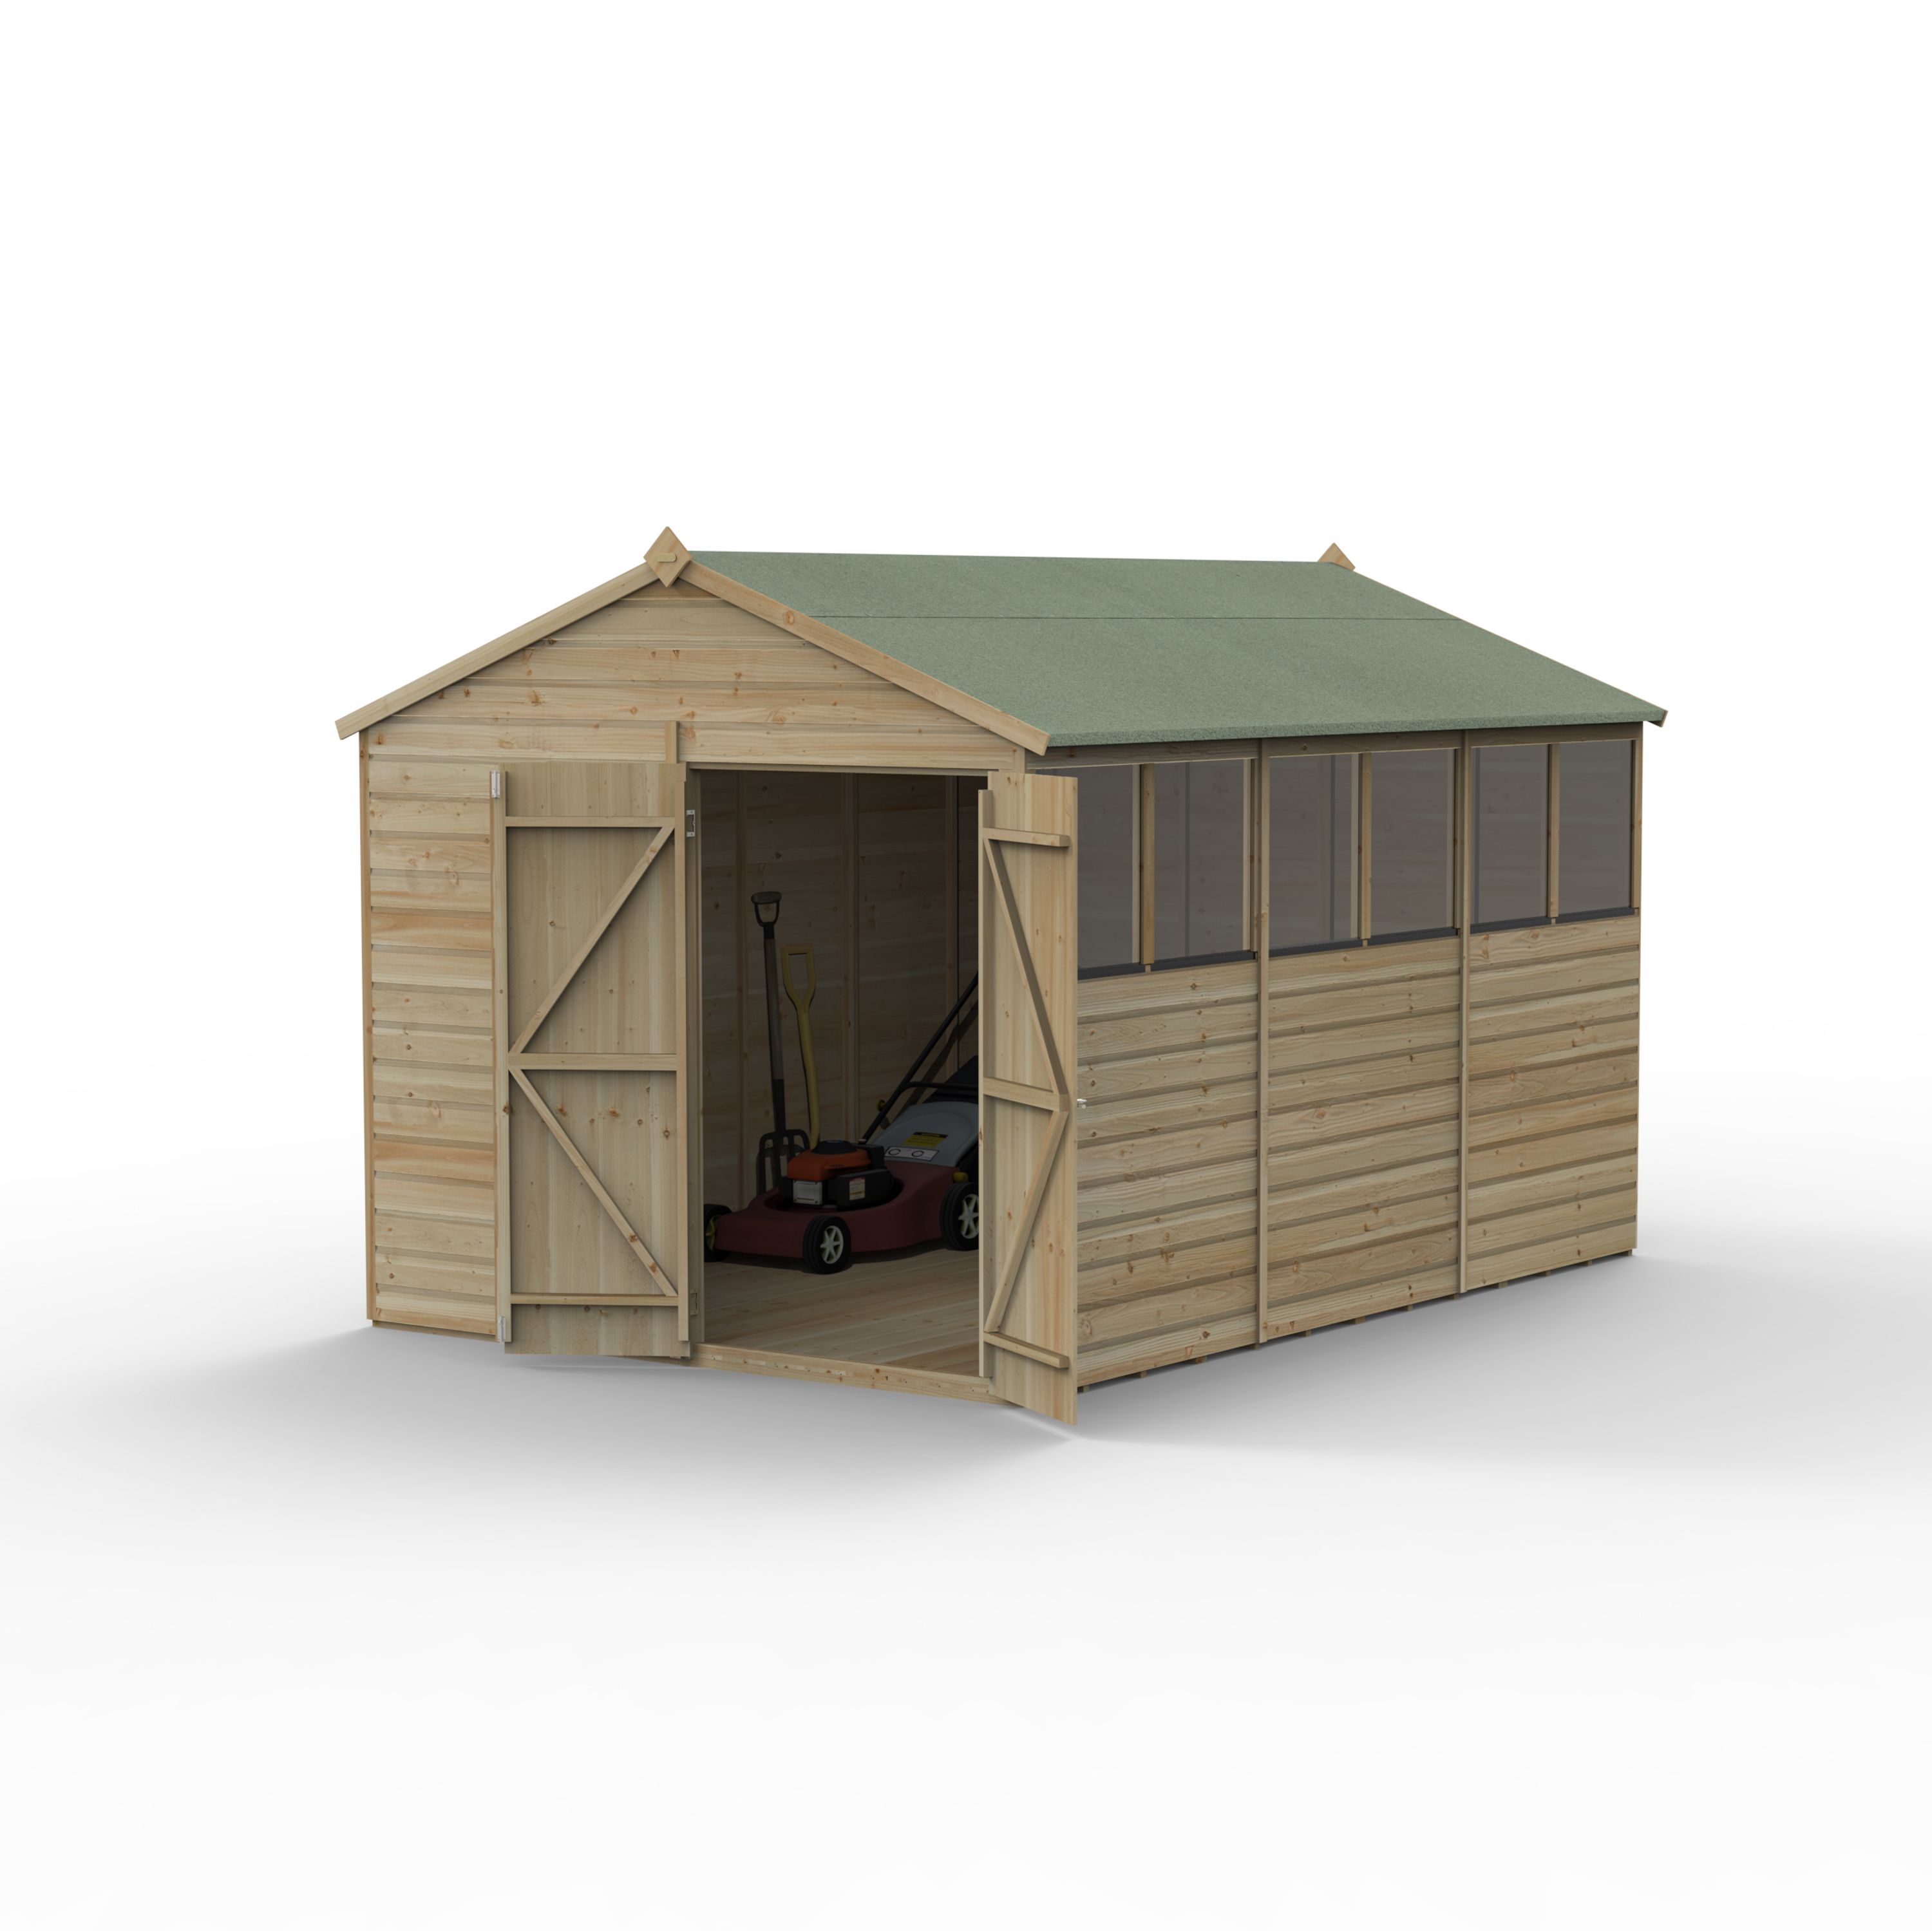 Forest Garden Beckwood 12x8 ft Apex Natural timber Wooden 2 door Shed with floor & 6 windows - Assembly not required